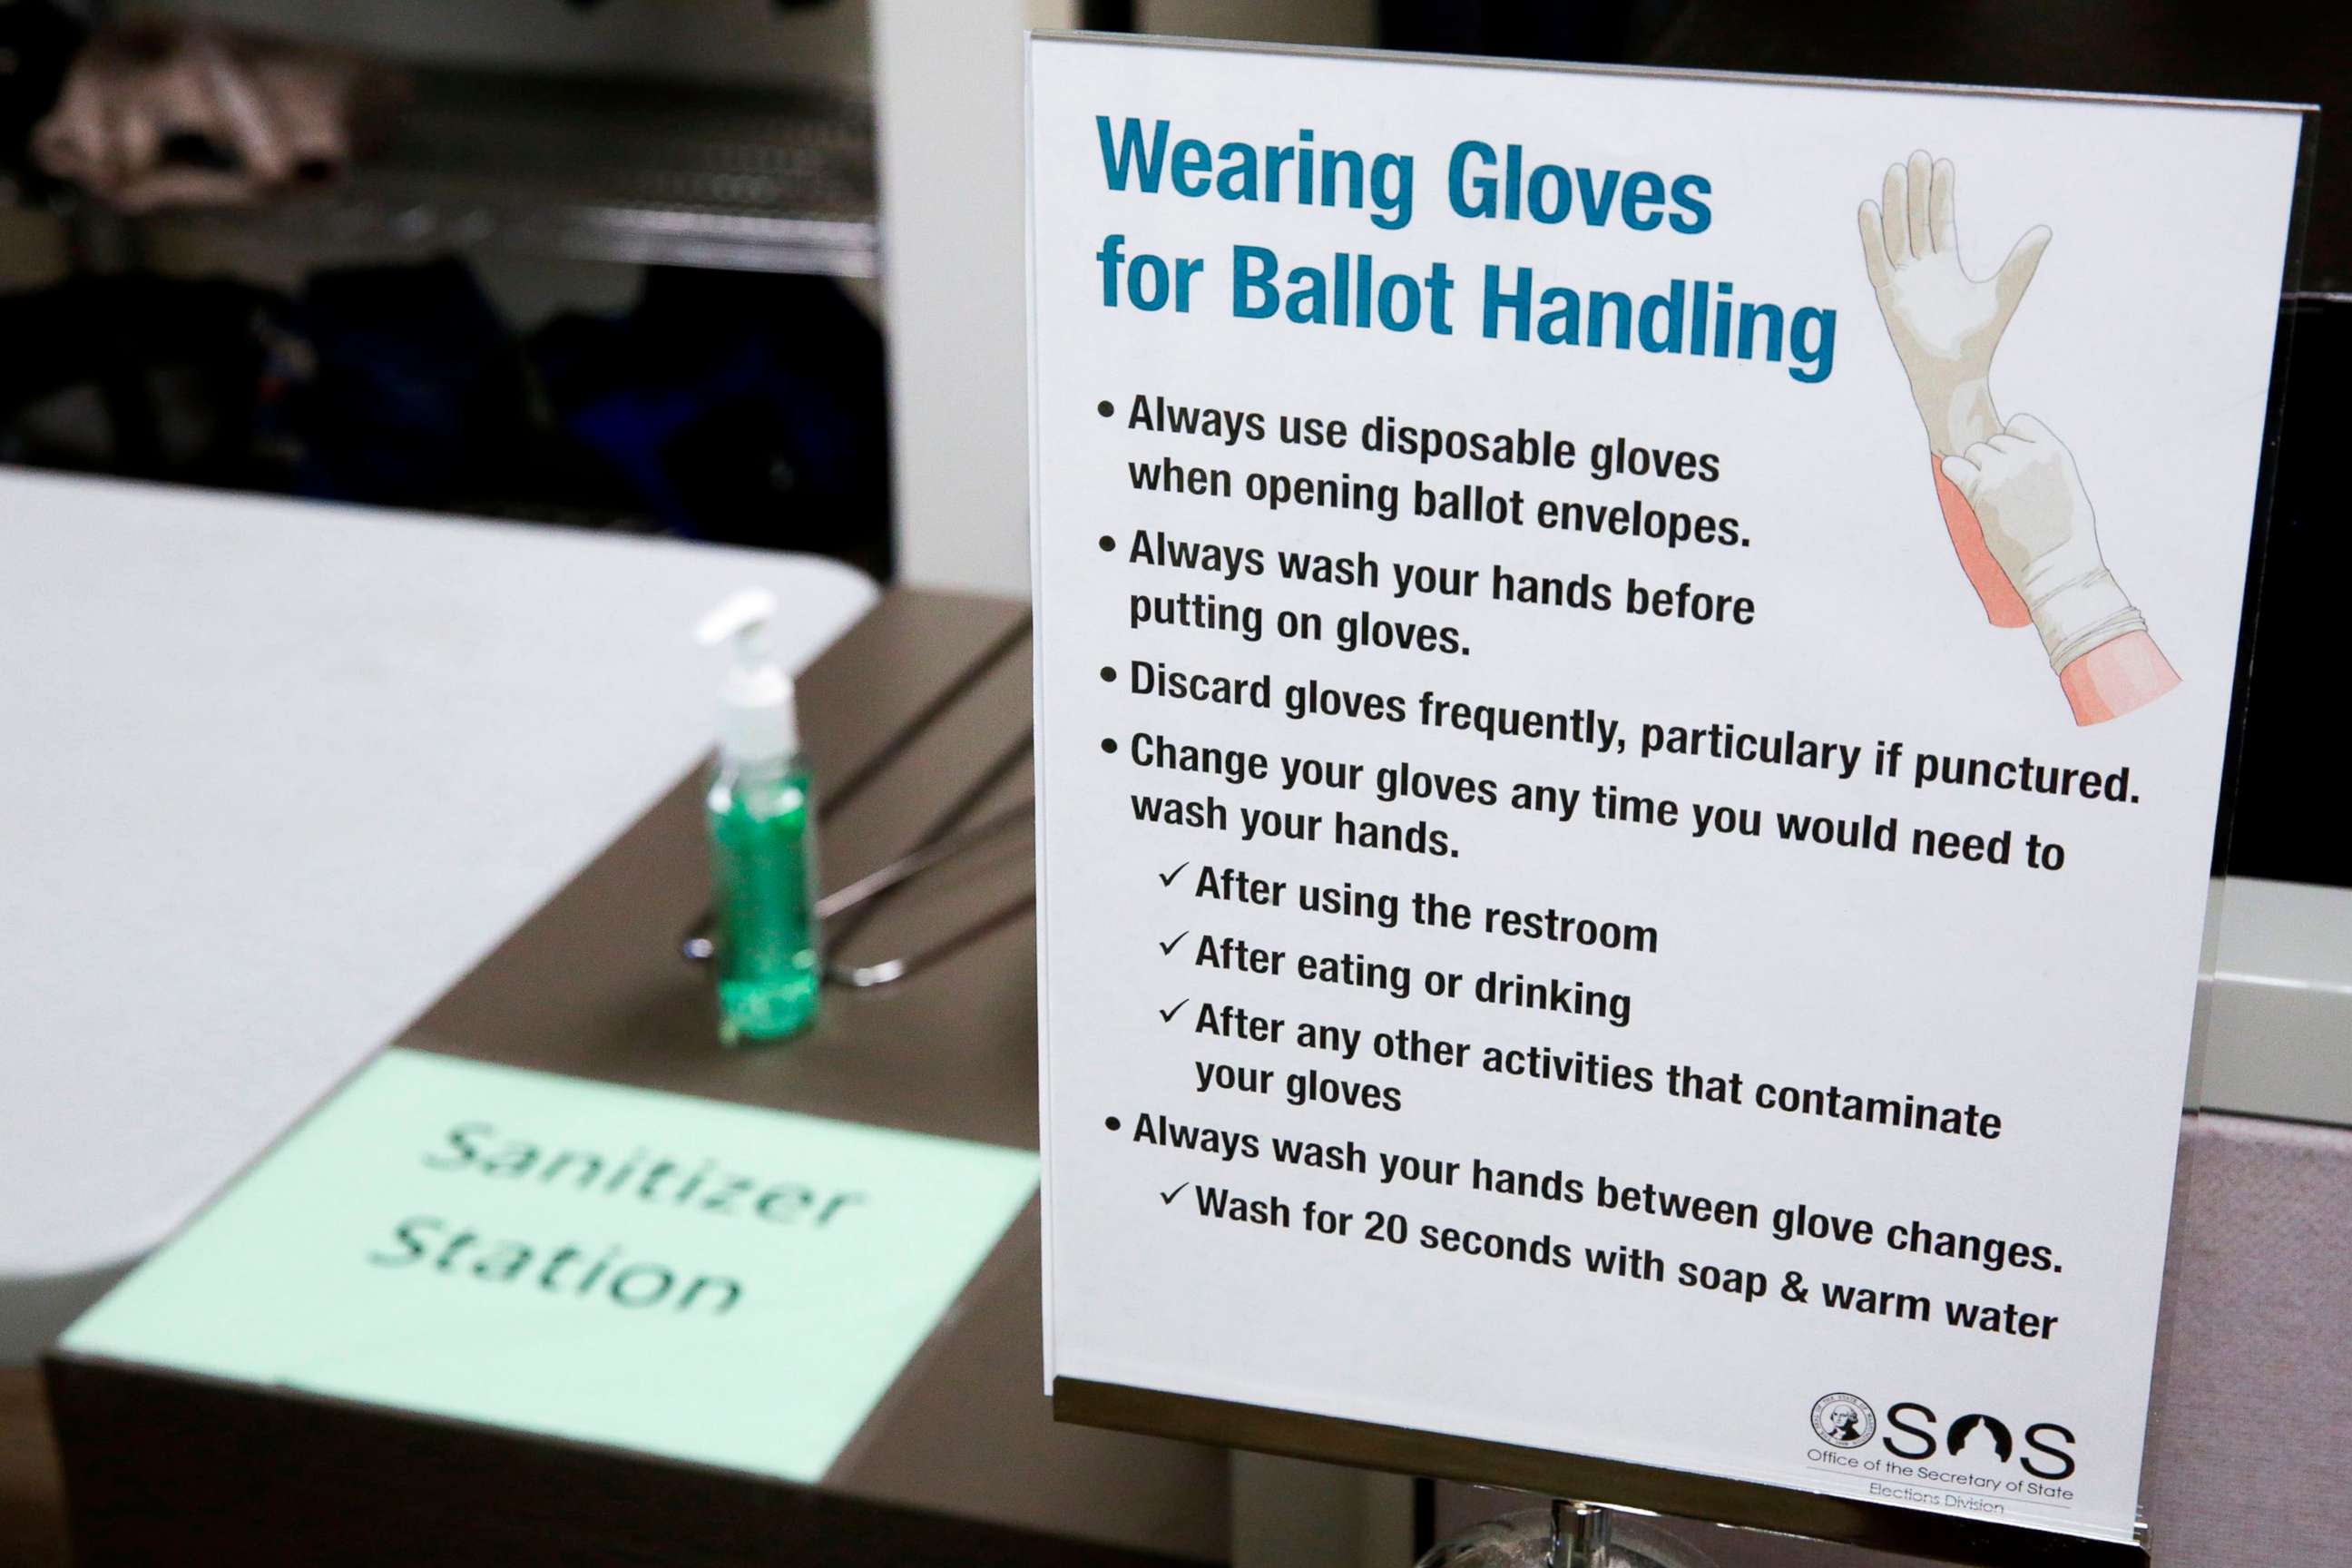 Primaries show high volume of absentee voting as states grapple with coronavirus